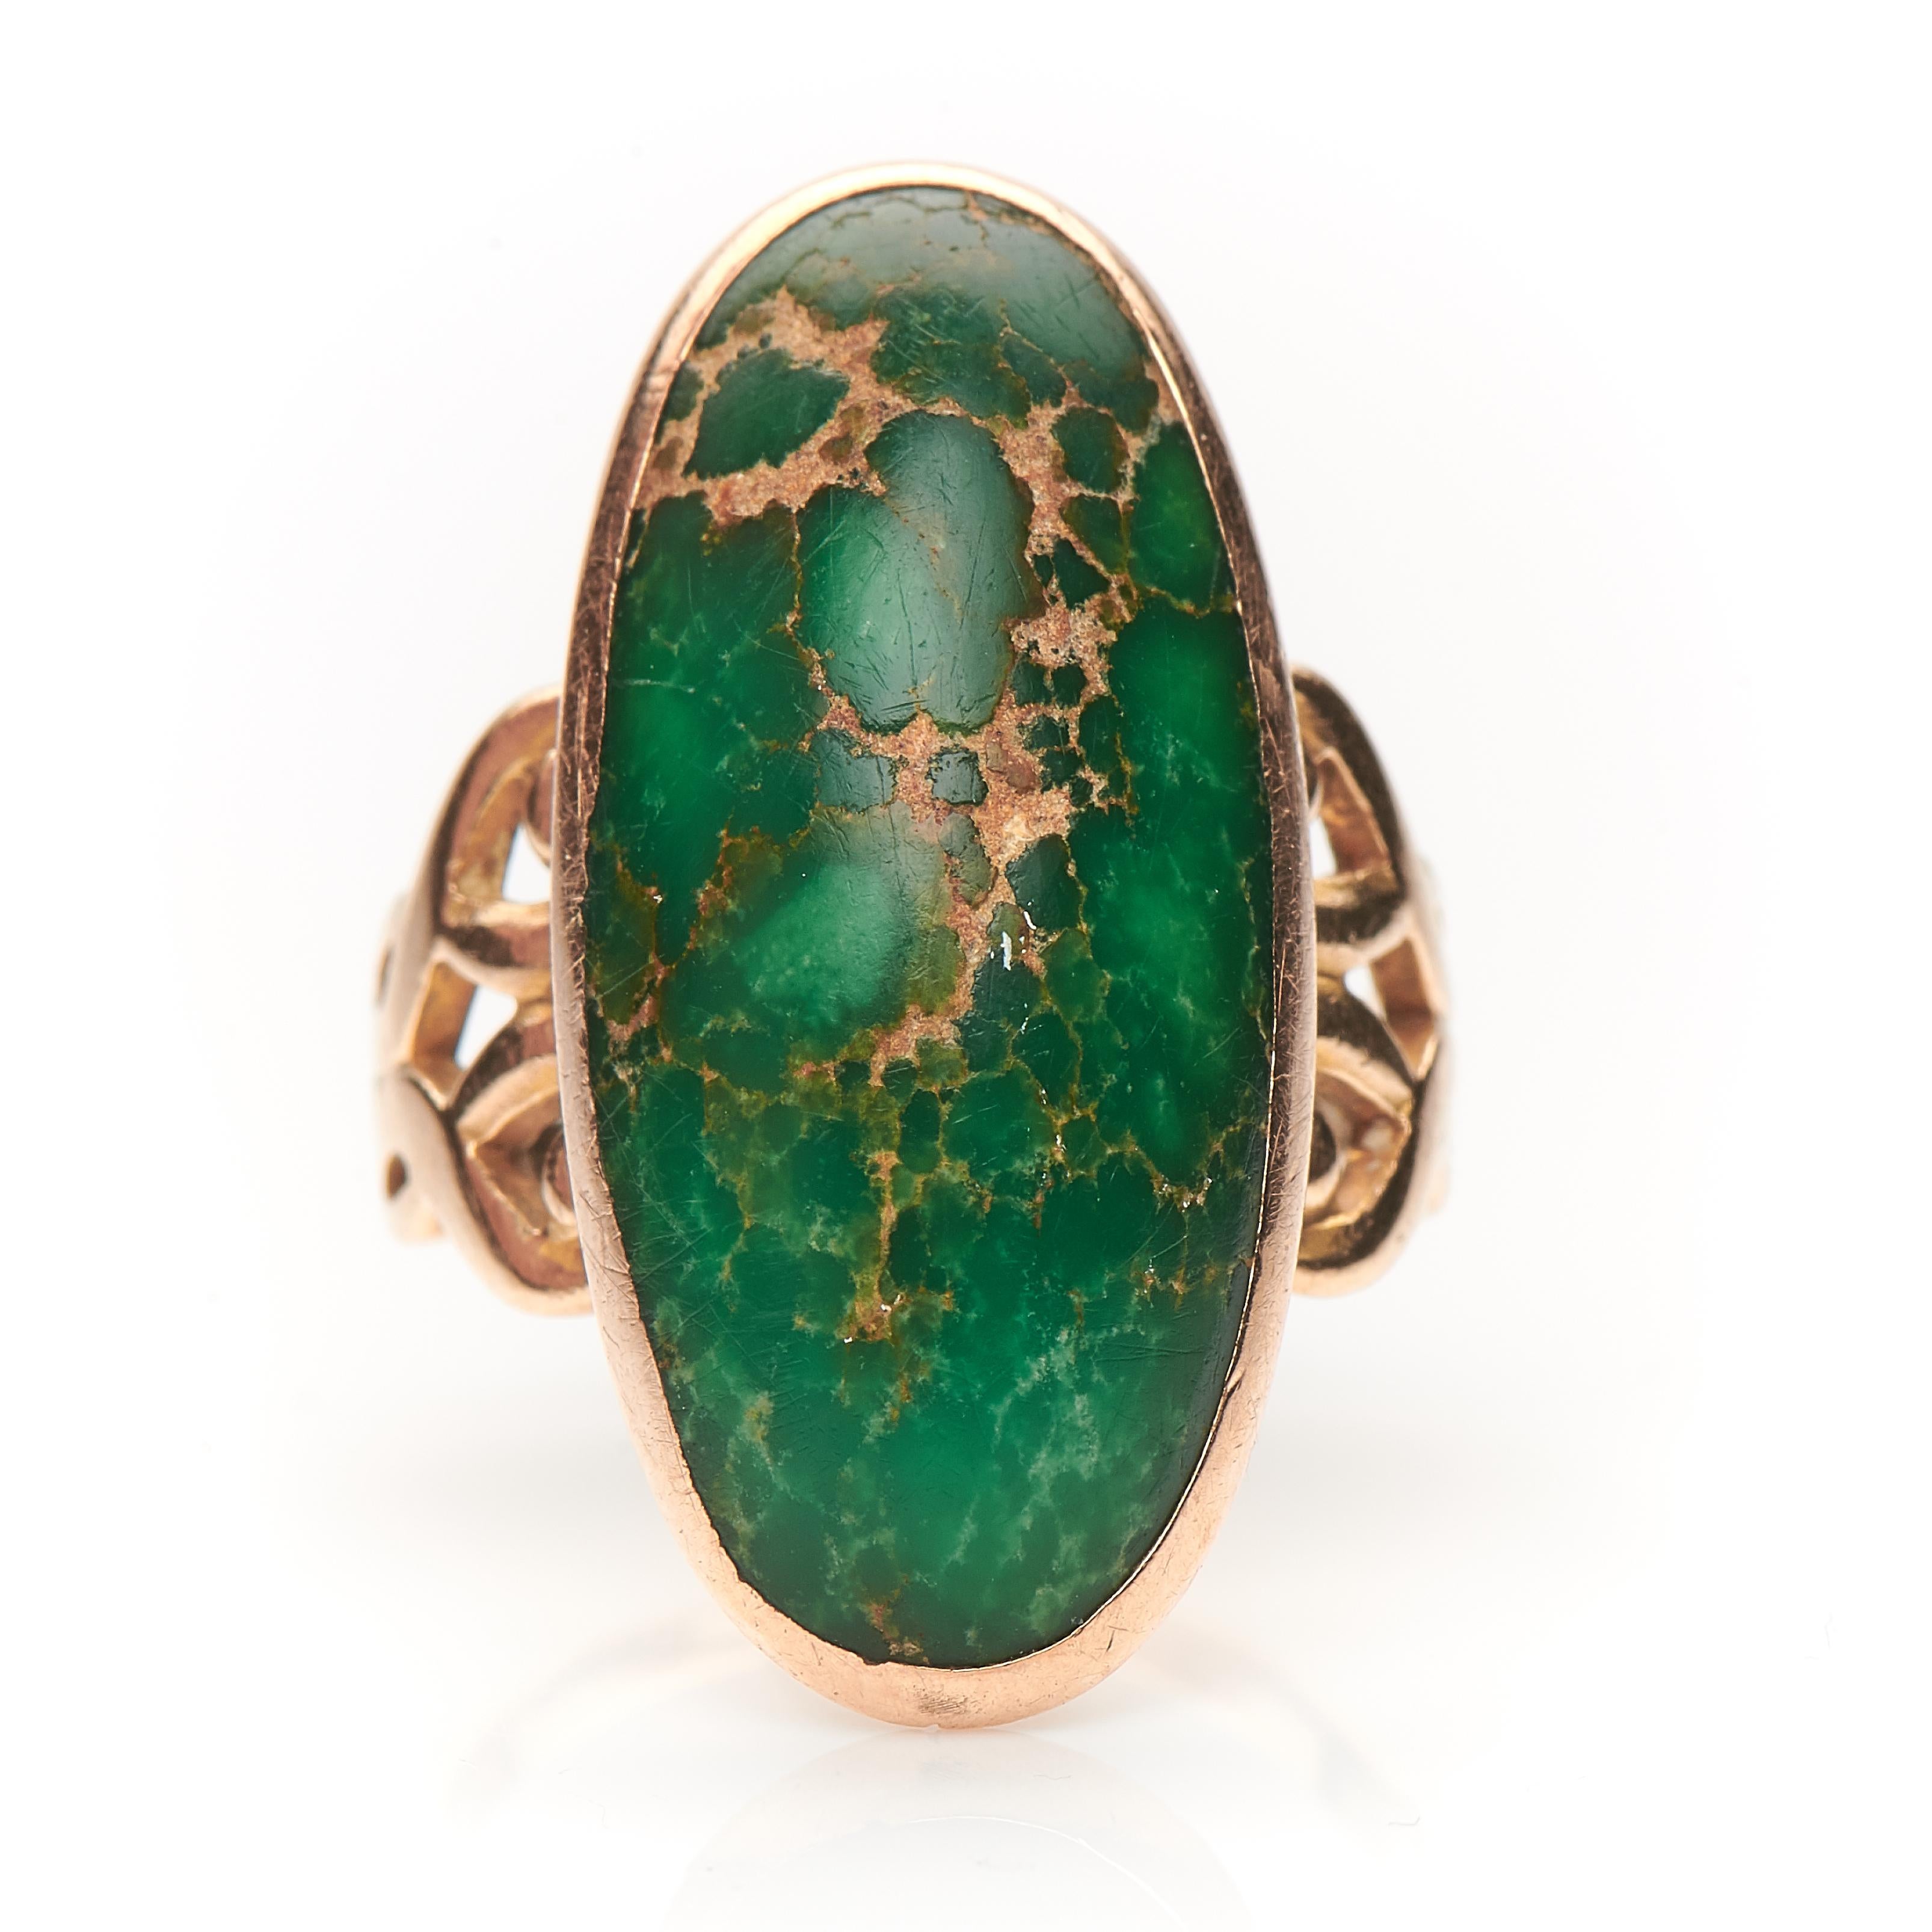 A beautiful early natural turquoise ring, circa 1790. The turquoise has become a wonderful colour with green tones over the last 200 years, set in a gold rubover setting with Celtic design shoulders. It feels wonderful in the hand, beautiful